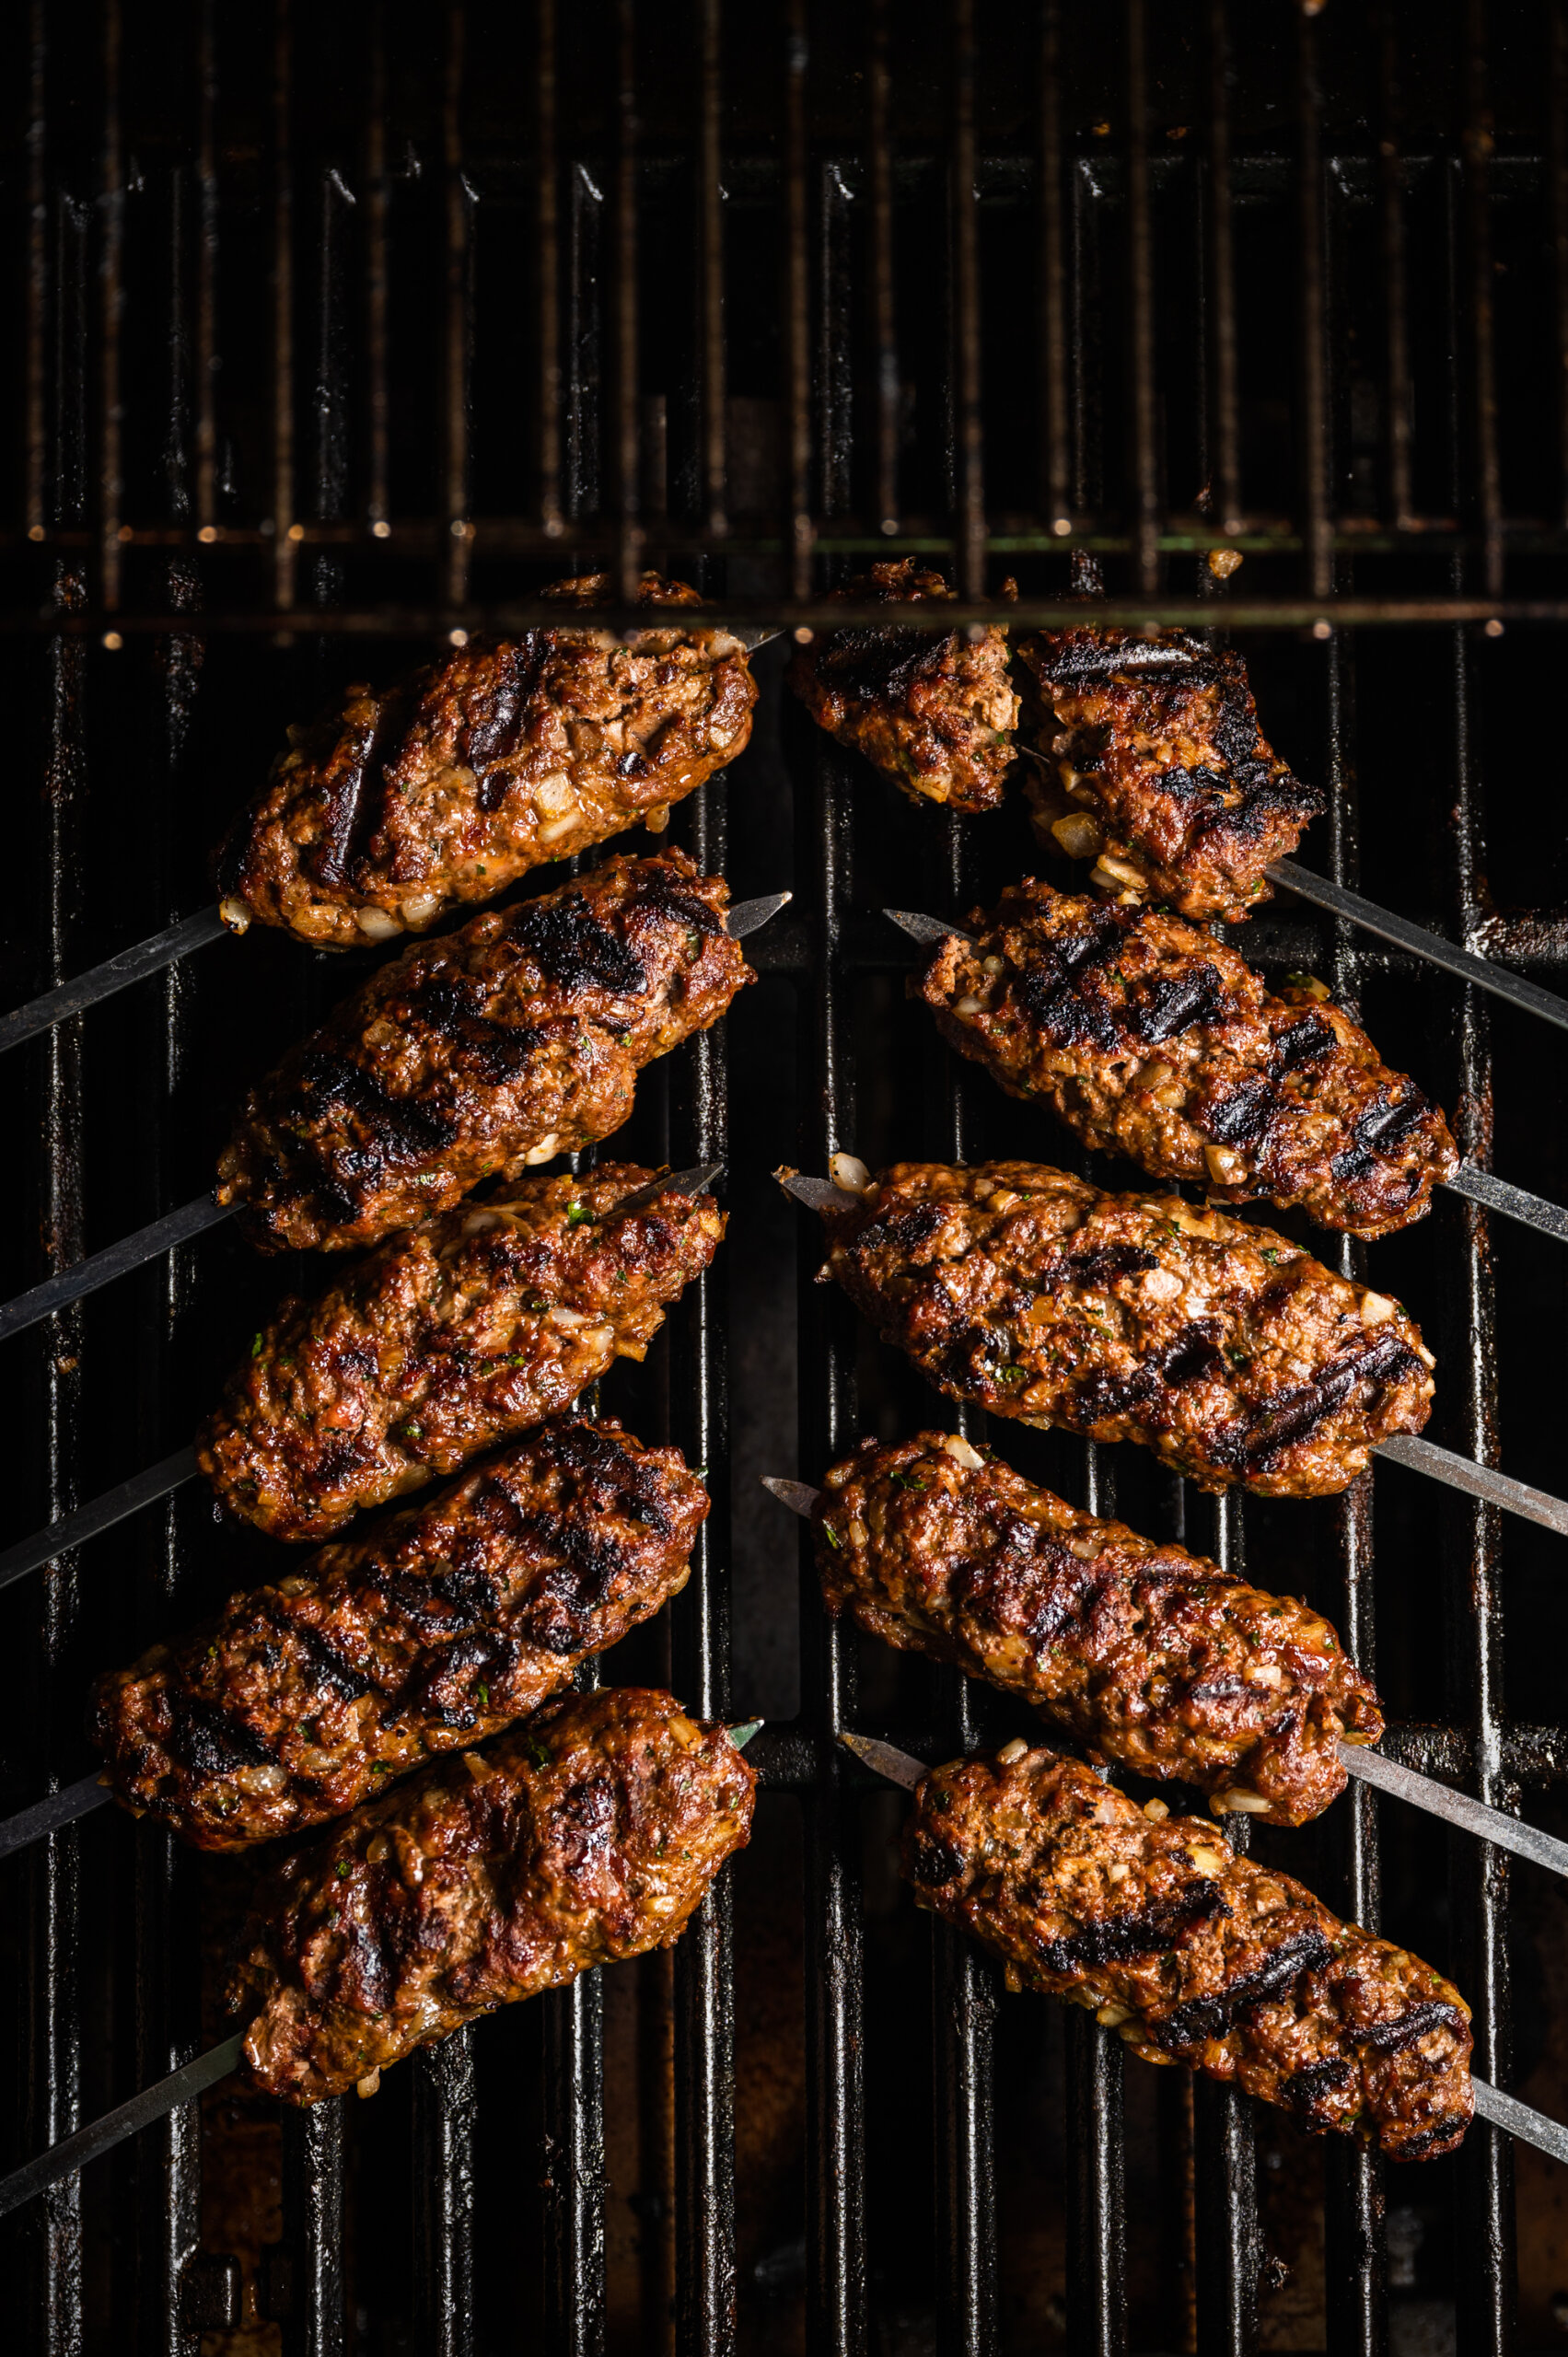 Lamb kebabs on the grill